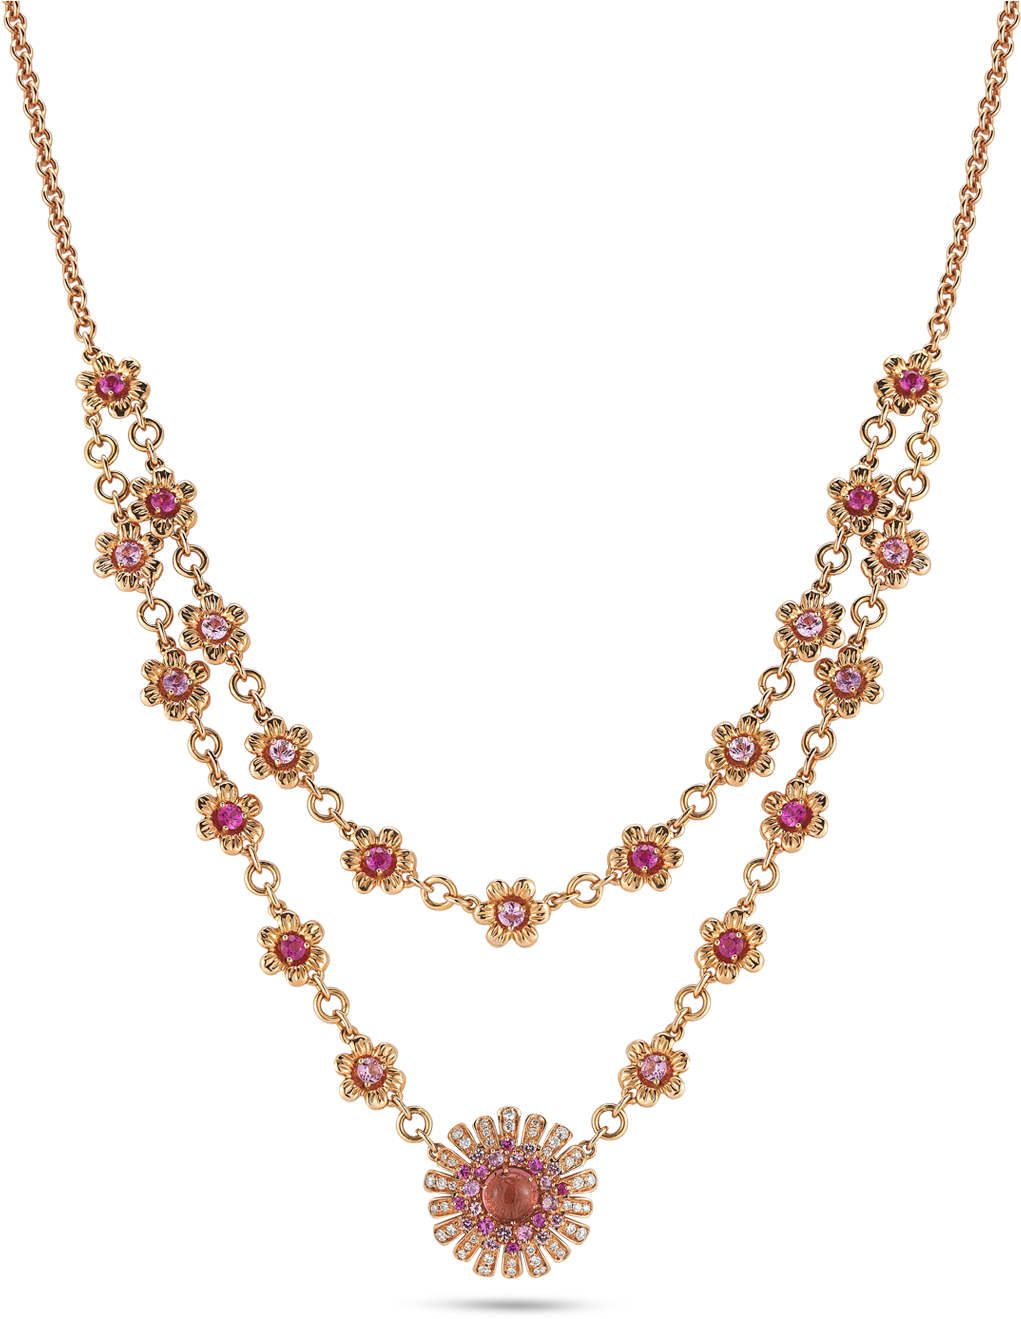 Gold Necklace Png Classic Necklaces - Necklace (1600x1600), Png Download